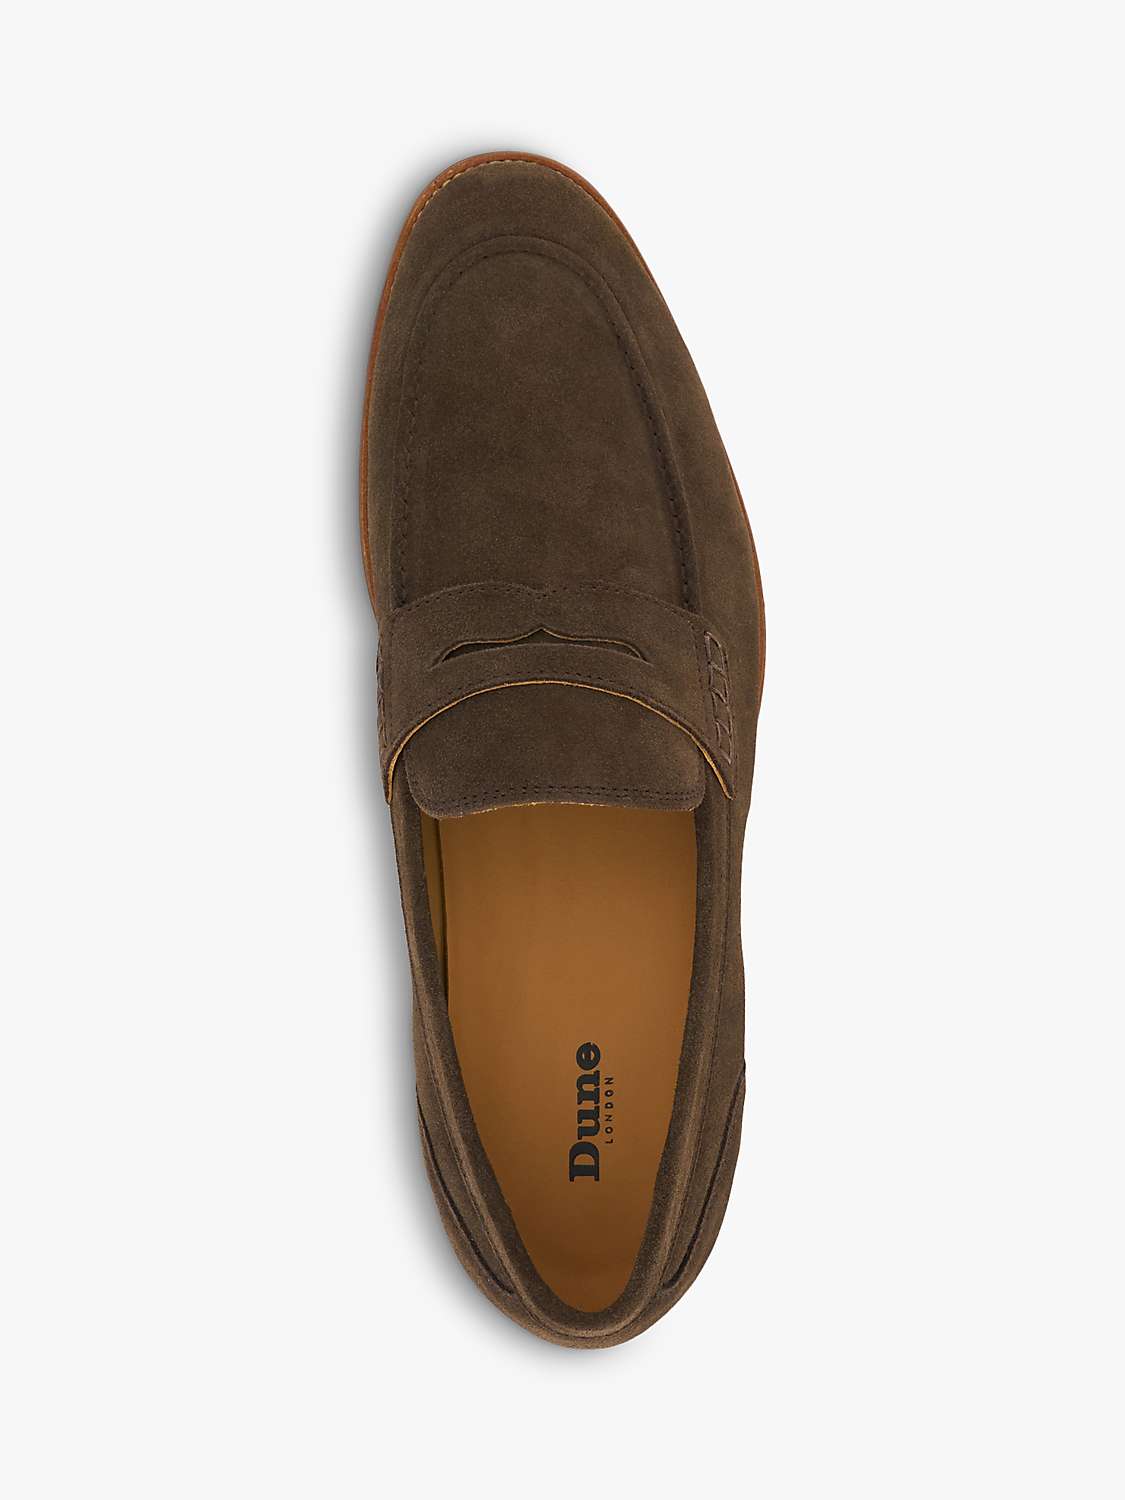 Buy Dune Wide Fit Sulli Suede Penny Loafers, Brown Online at johnlewis.com